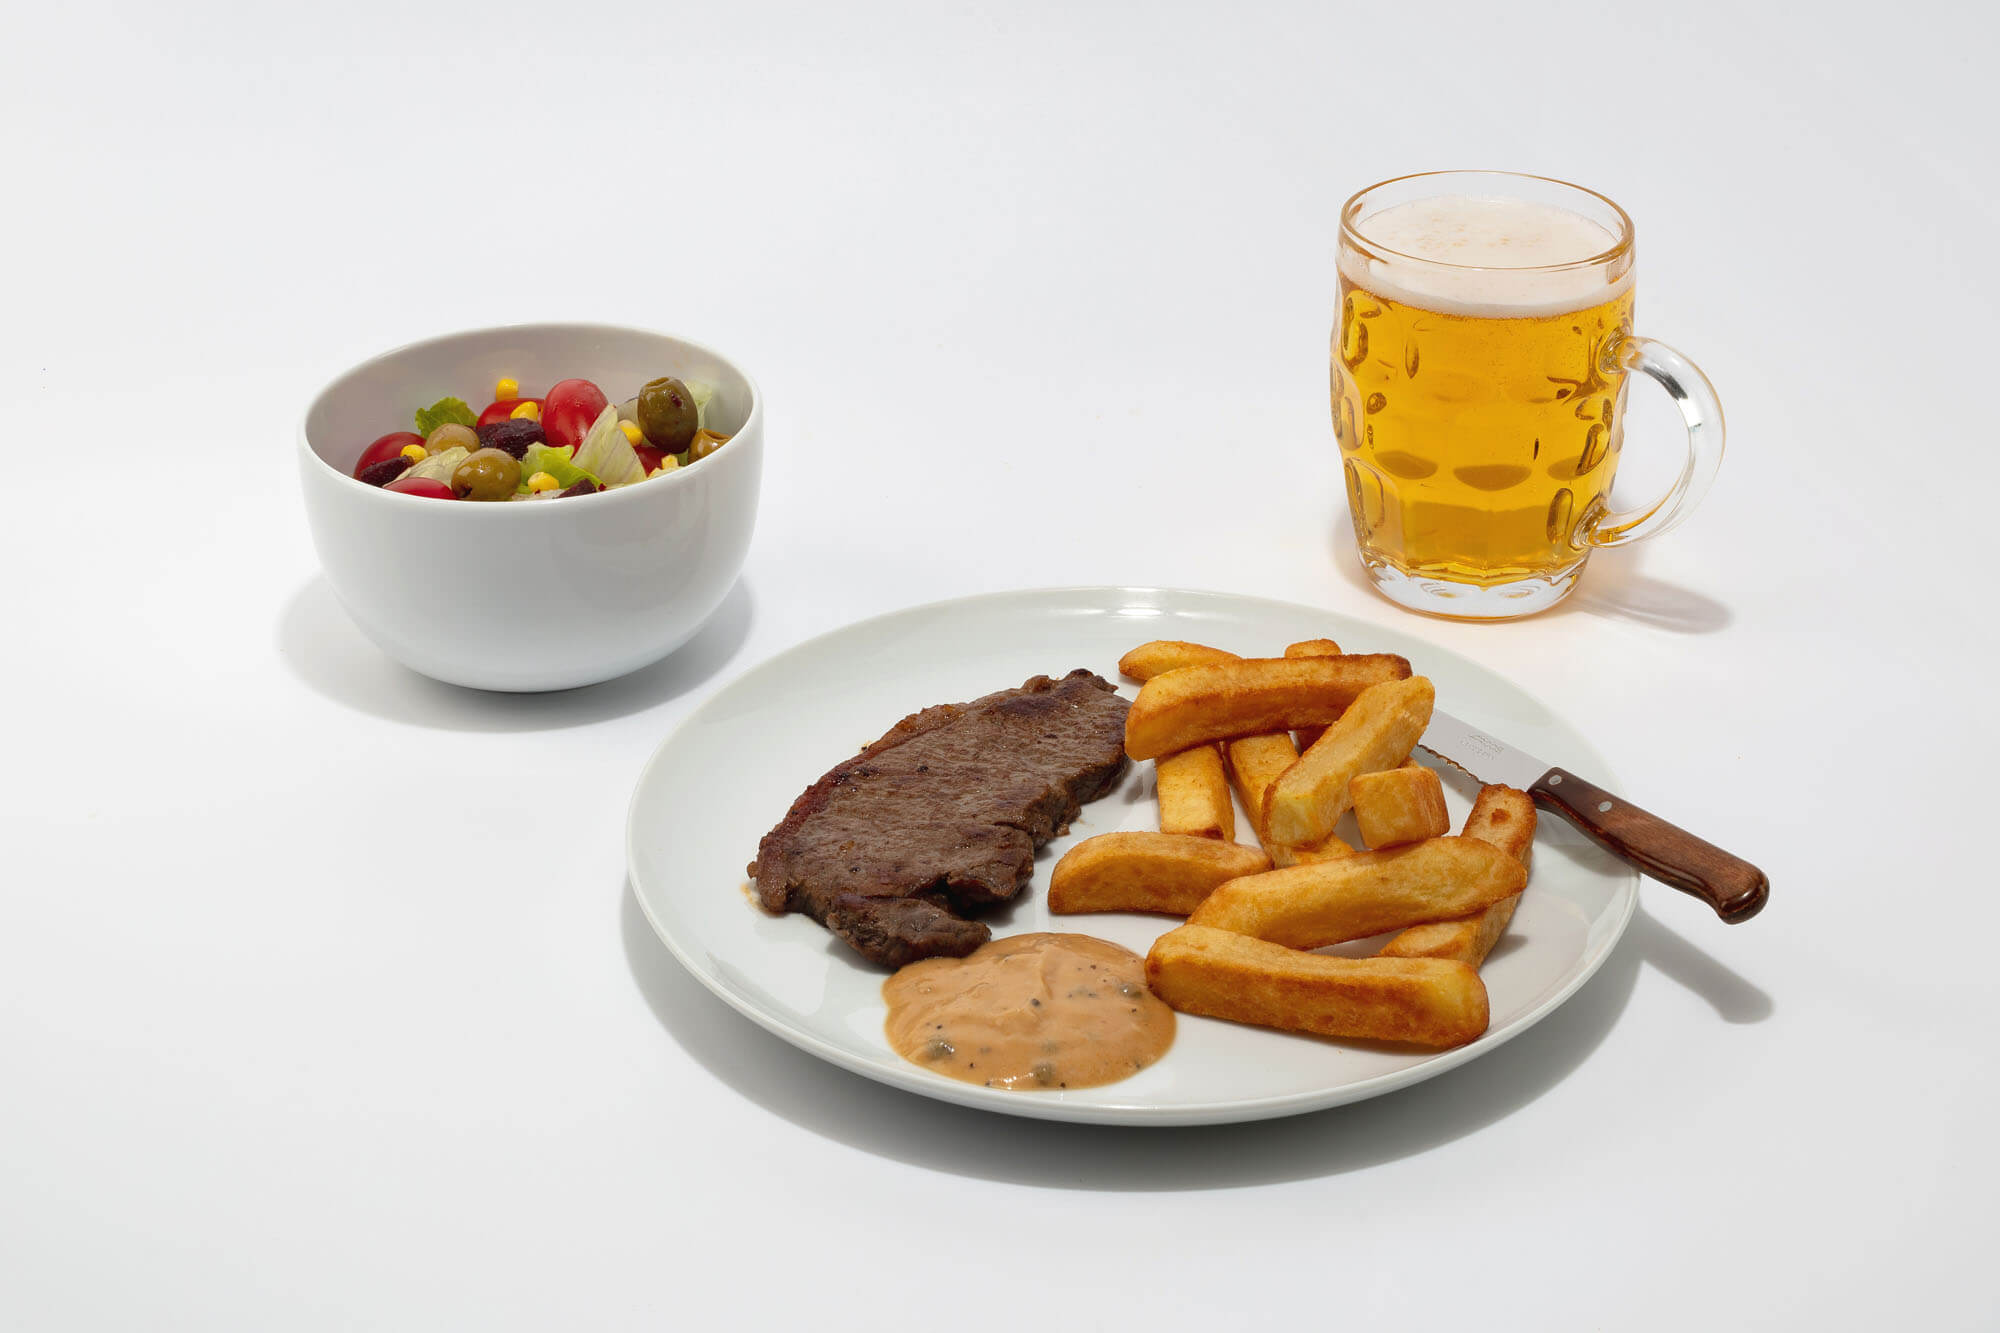 steak dinner with beer and olives